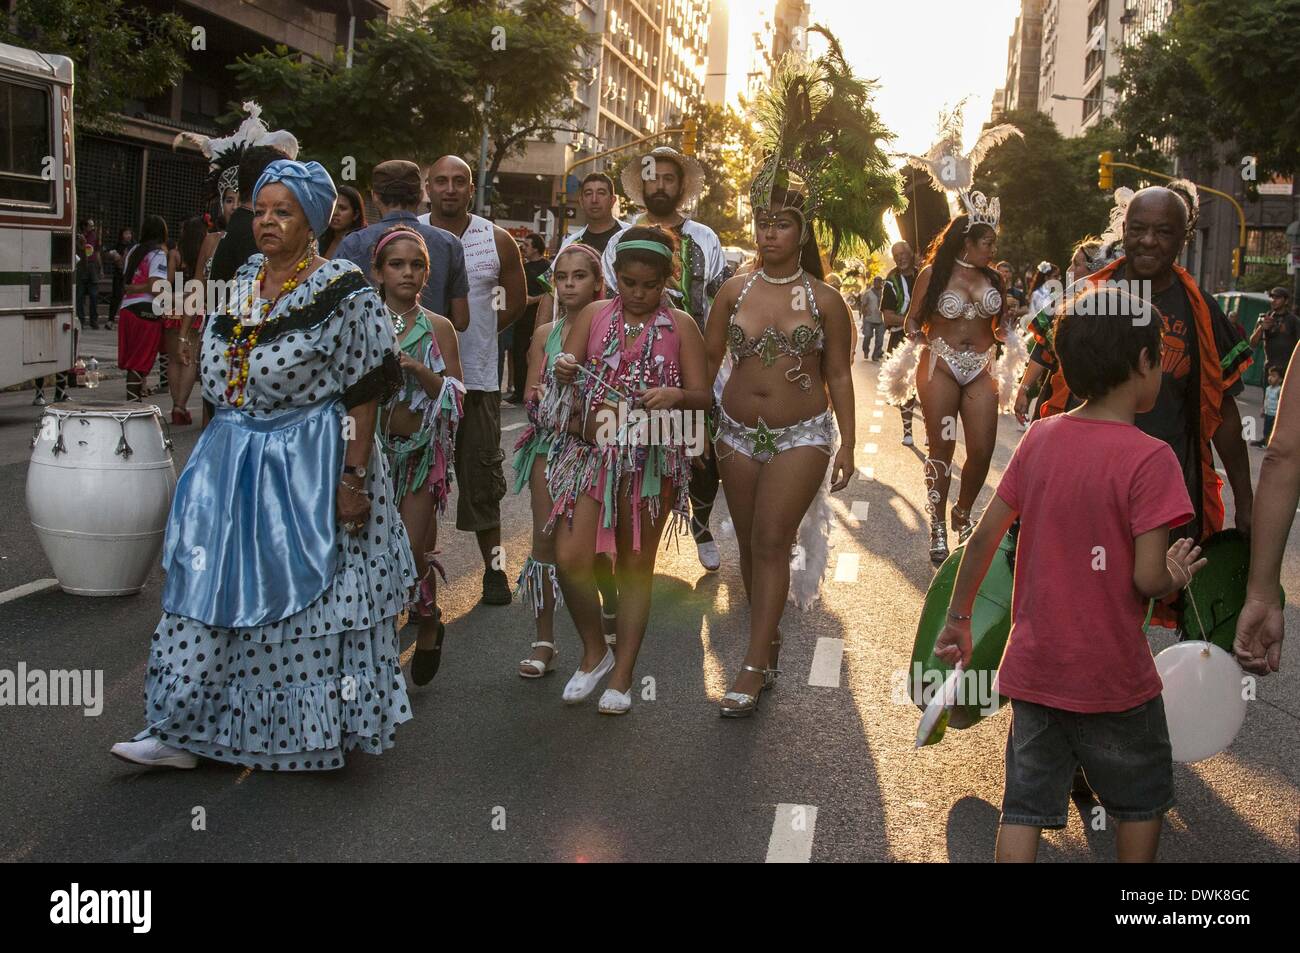 Buenos Aires, Buenos Aires, Argentina. 8th Mar, 2014. As the carnaval season comes to an end, the streets of Buenos Aires bear witness to the third Afrodescendants' Carnaval in San Telmo neighbourhood. Thousands of people celebrate the city's rich and often overlooked African cultural heritage as traditional comparsas dance through the streets to the beat of the candombe drums. © Patricio Murphy/ZUMAPRESS.com/Alamy Live News Stock Photo